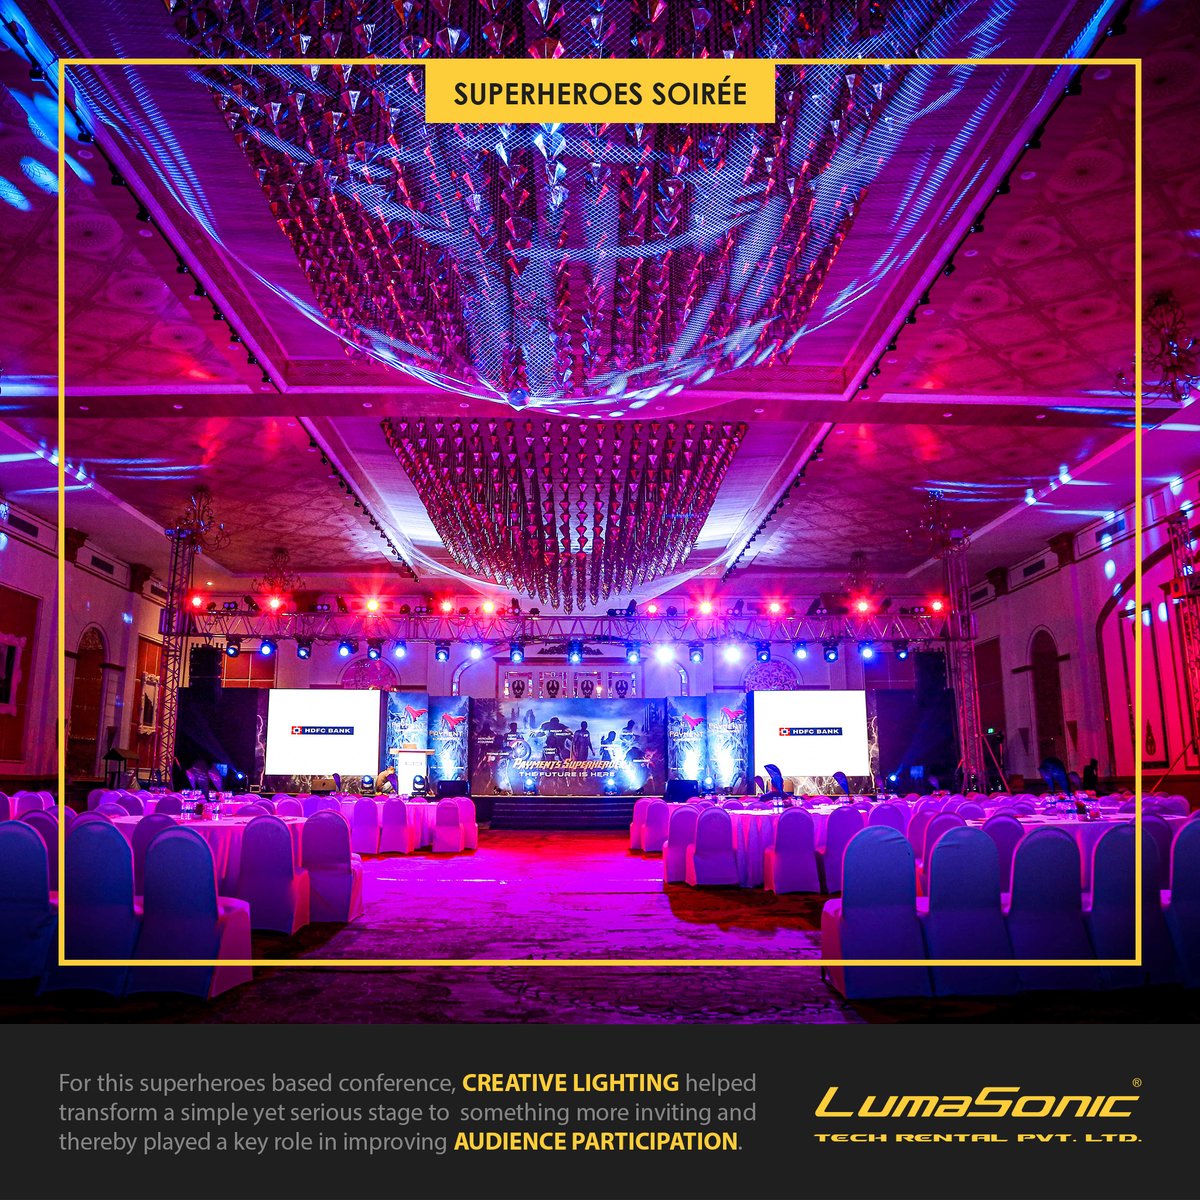 When you don’t have much time to turn around your setup from a conference to a party, you turn to intelligent lighting to save the day.

#lumasonic #goa #eventtechnology #eventtech #corporateevents  #concerts #liveevents  #movinghead #eventlighting #concertlighting #lightingshow